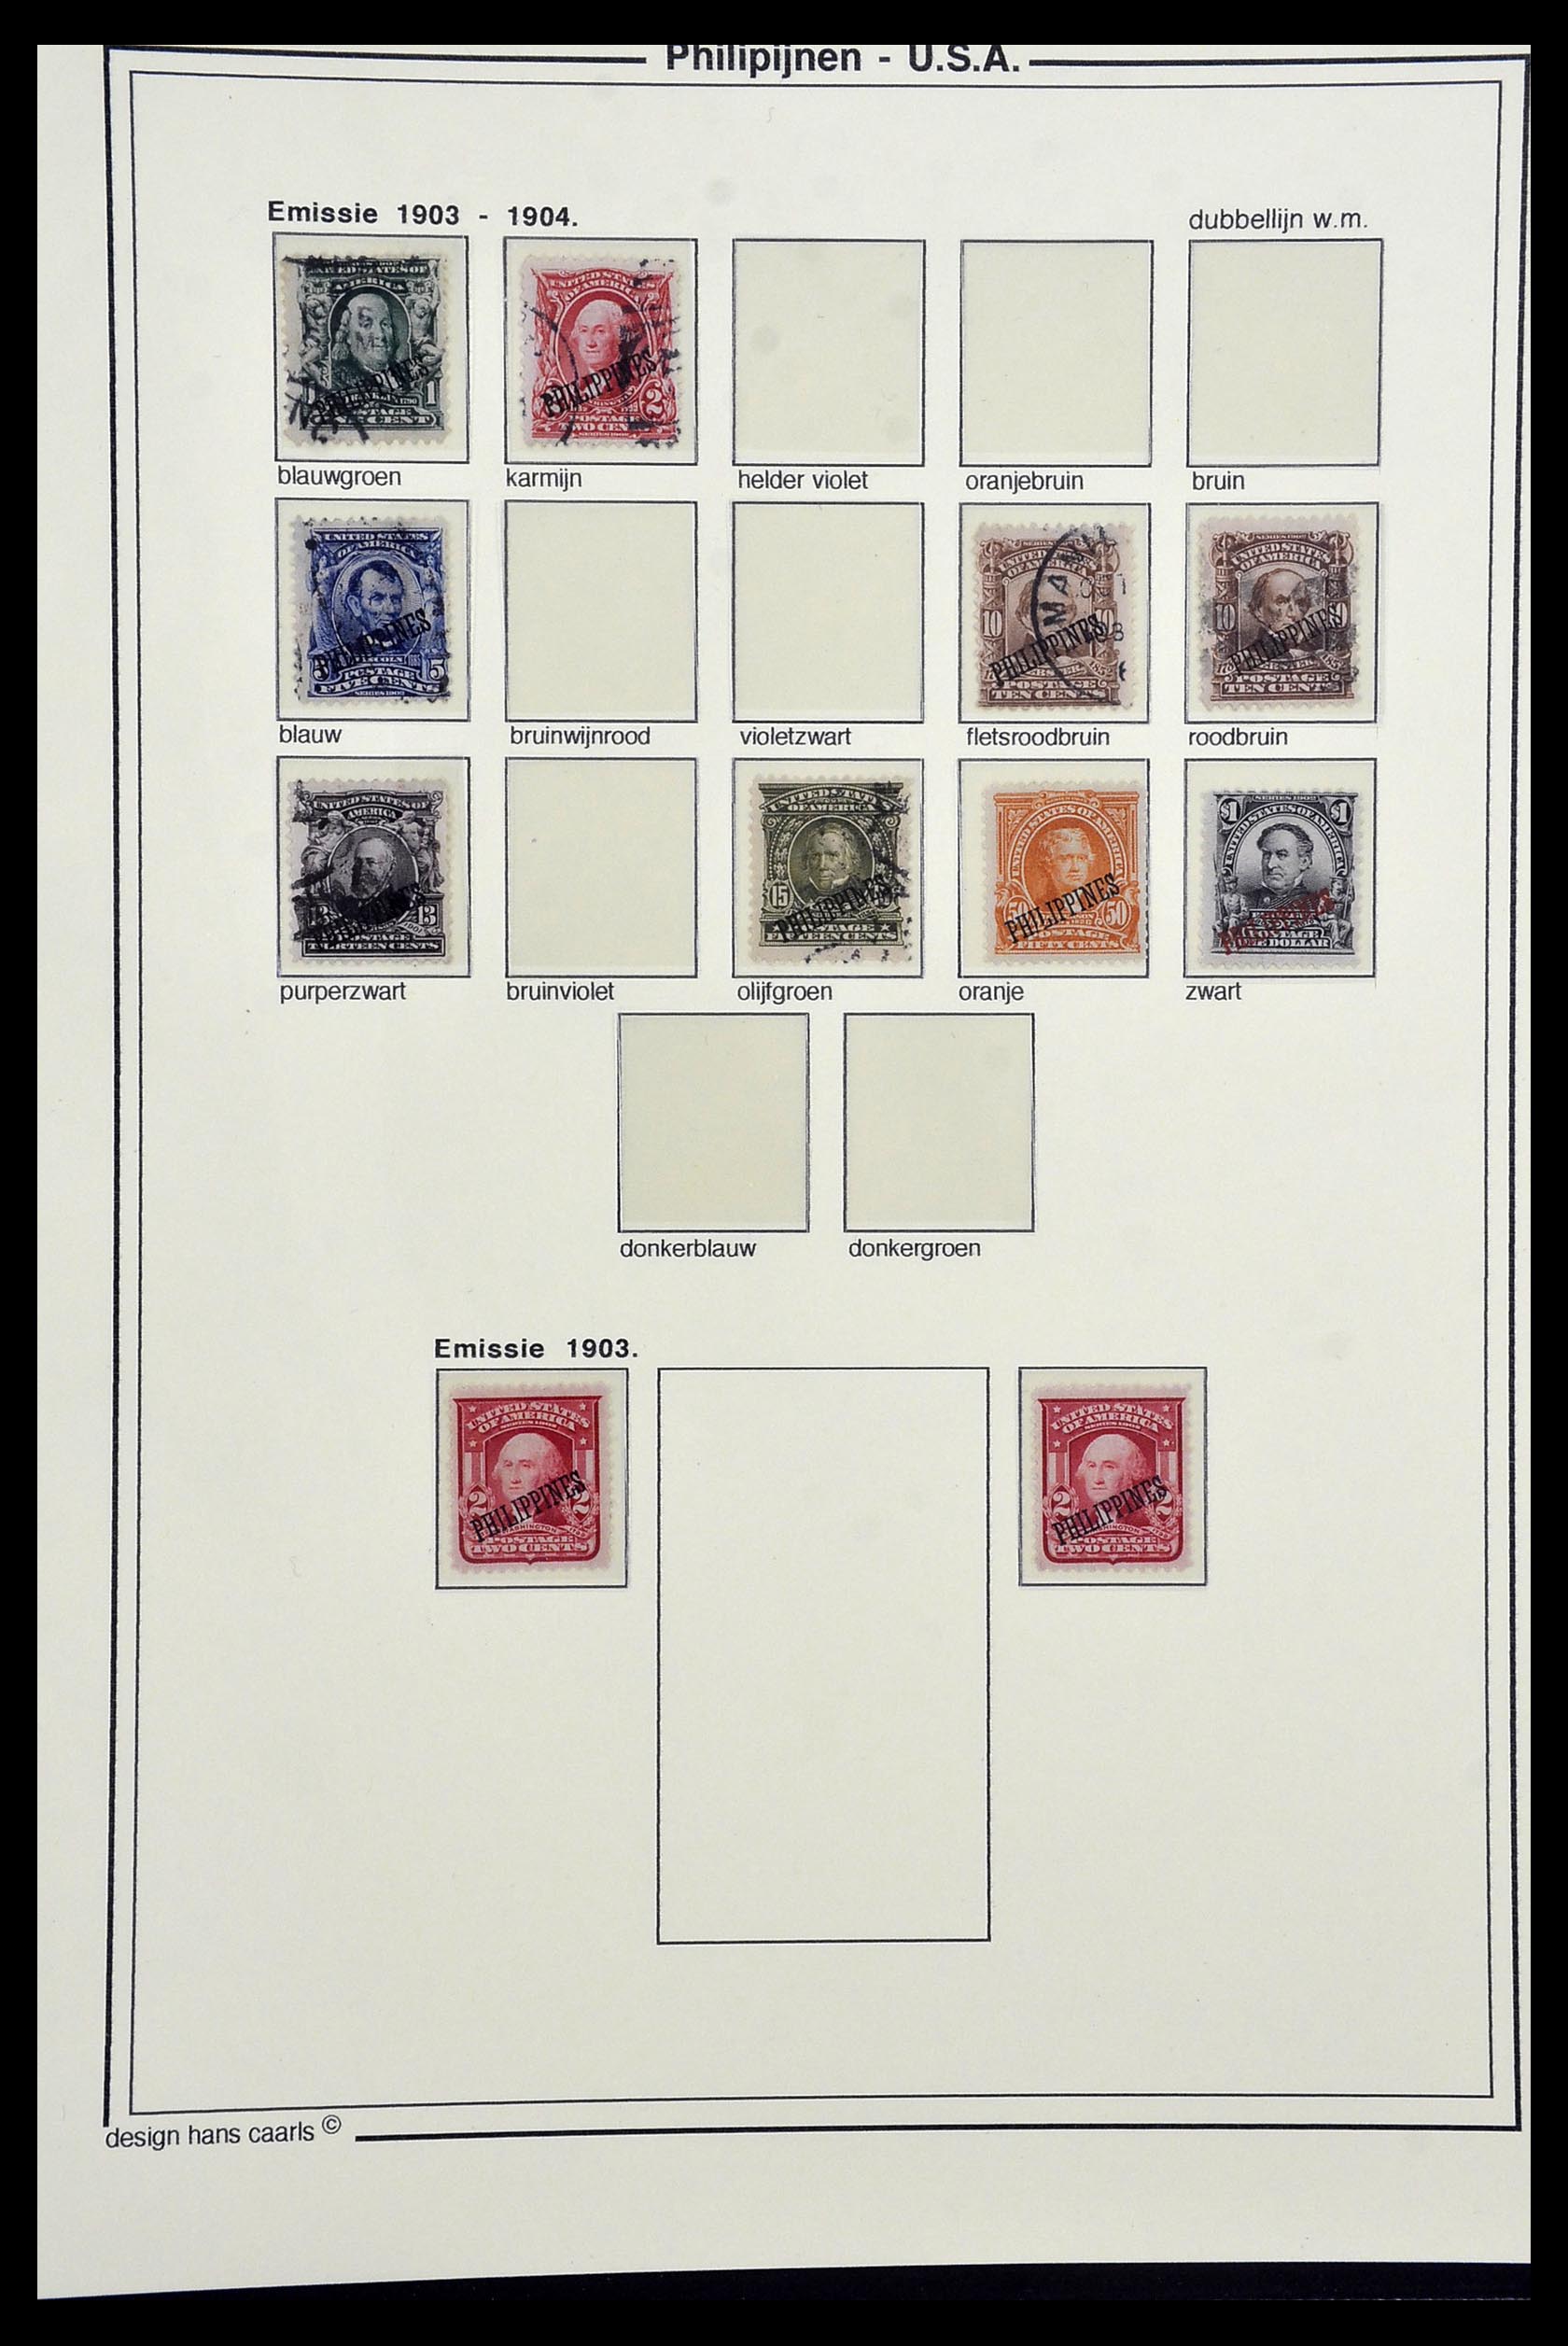 34530 002 - Stamp Collection 34530 Philippines 1899-1944.